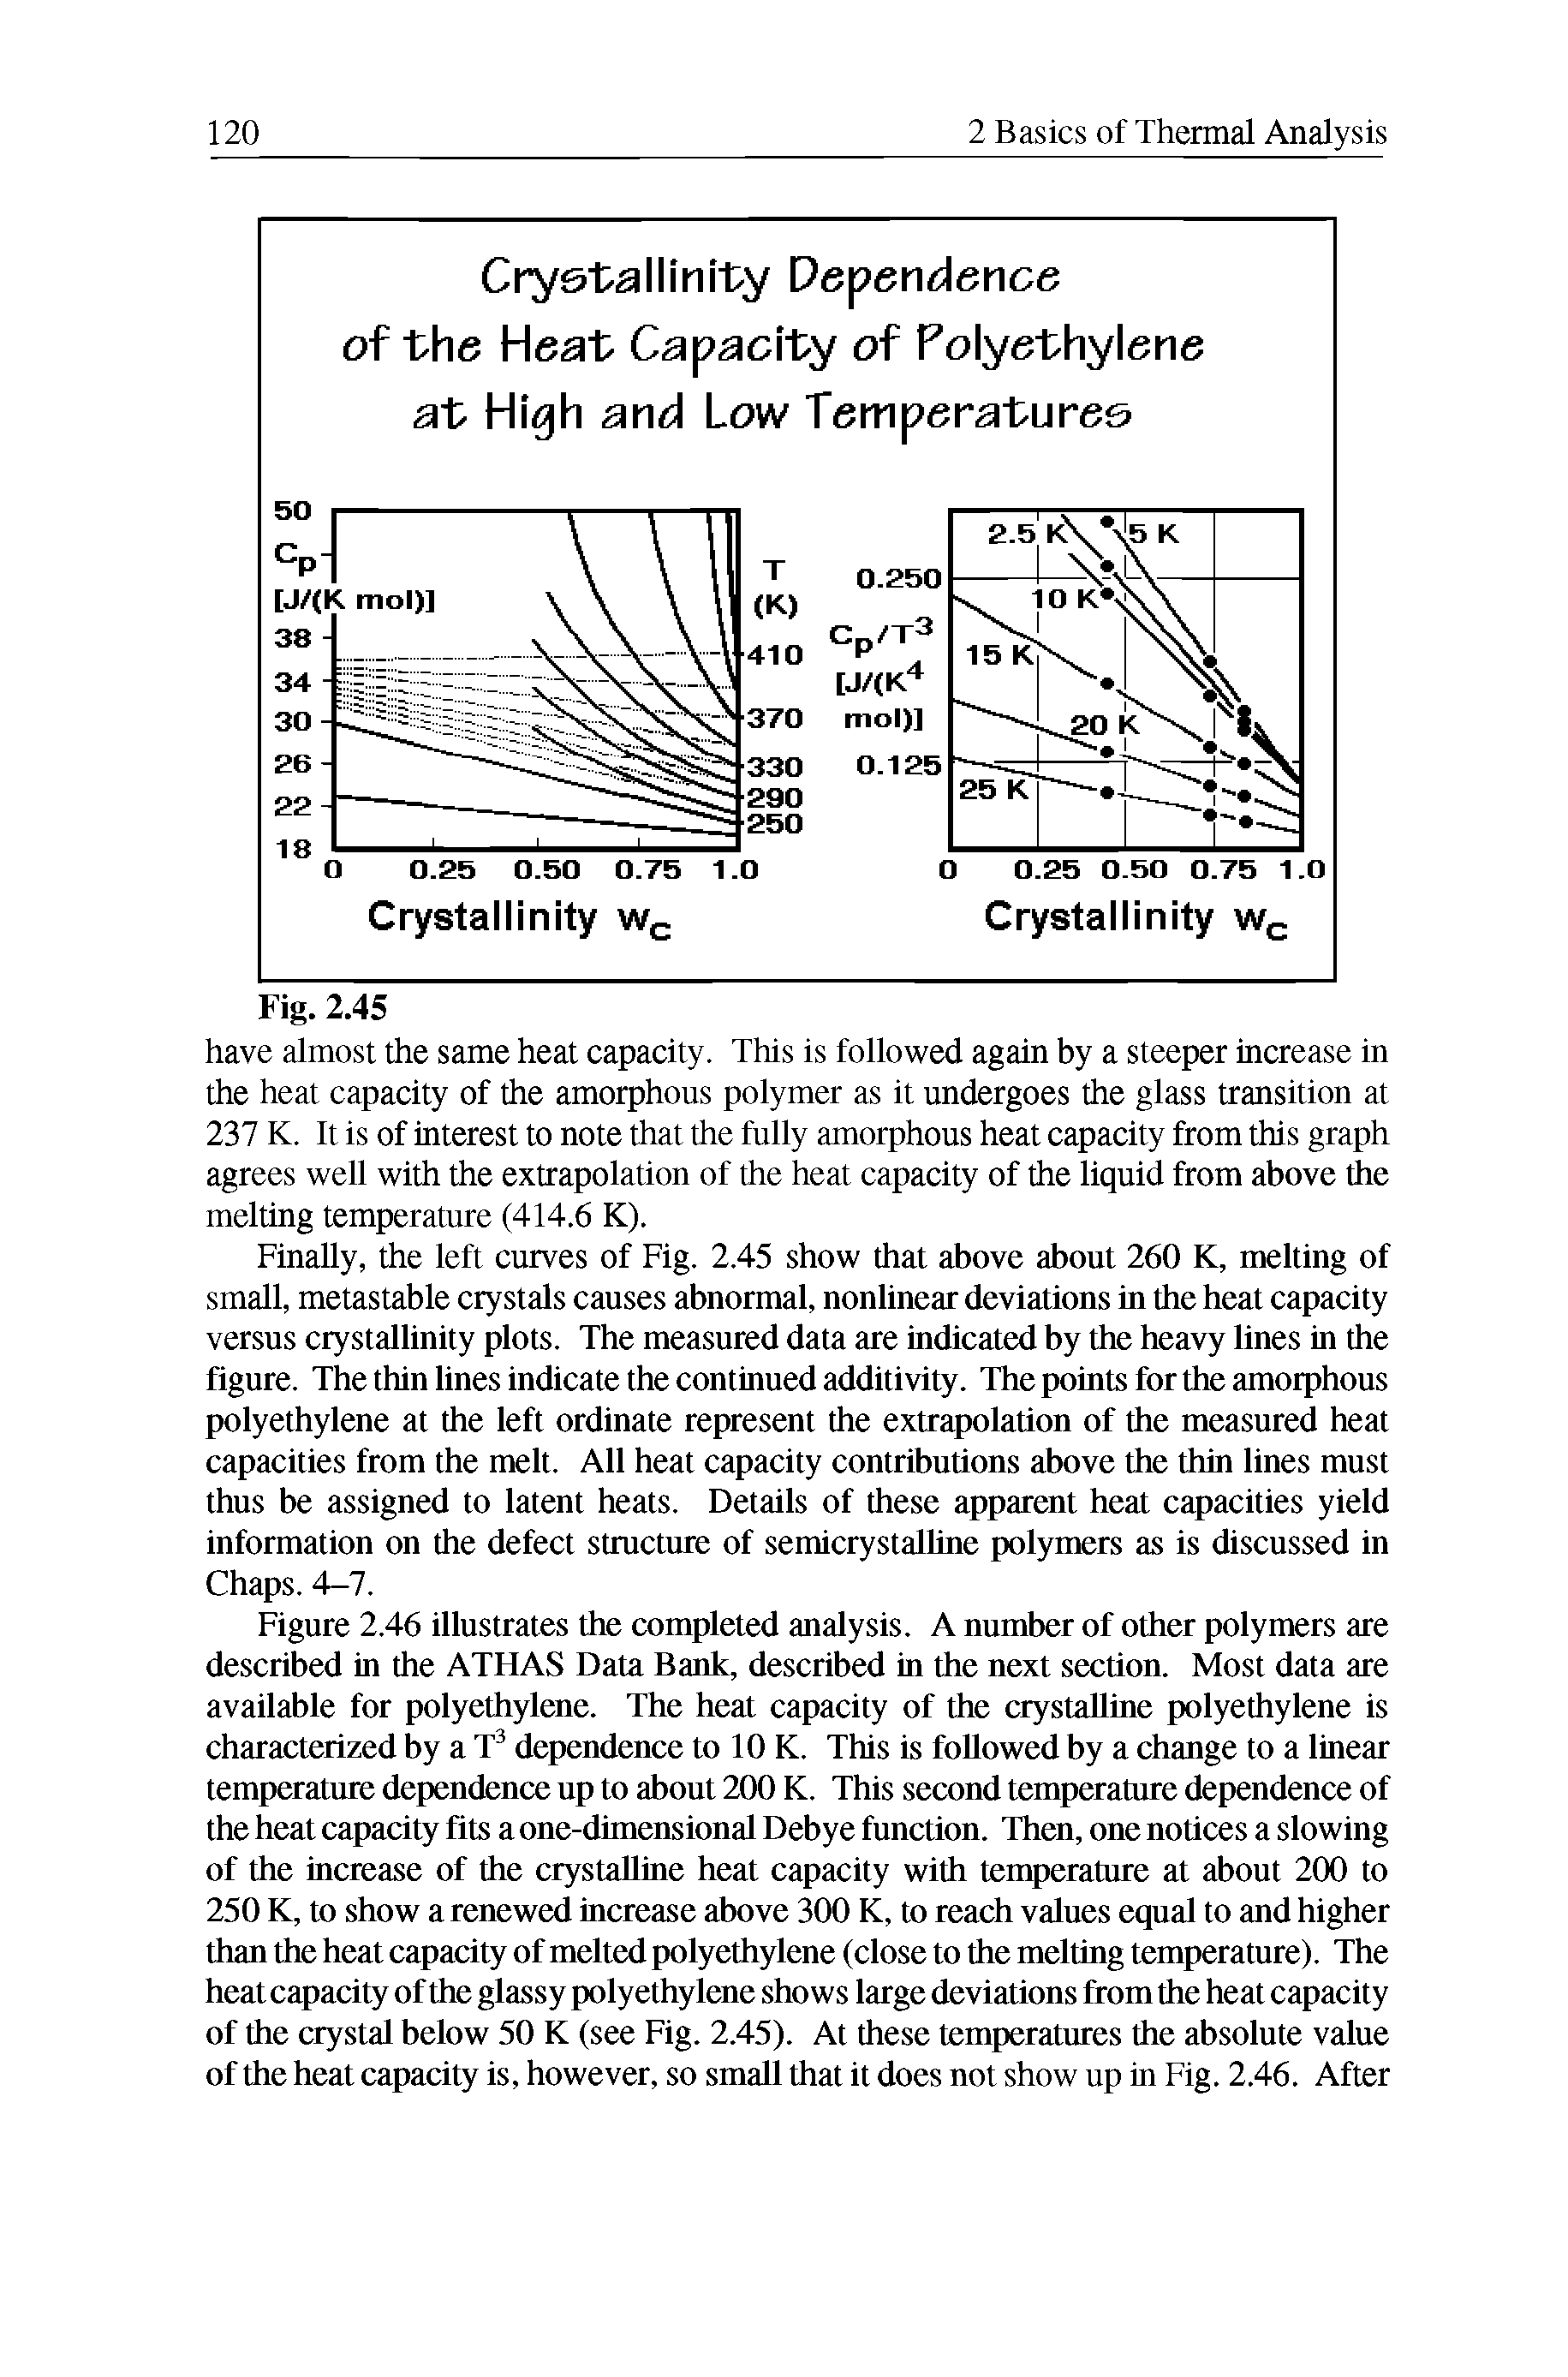 Figure 2.46 illustrates the completed analysis. A number of other polymers are described in the ATHAS Data Bank, described in the next section. Most data are available for polyethylene. The heat capacity of the crystalline polyethylene is characterized by a T dependence to 10 K. This is followed by a change to a linear temperature dependence up to about 200 K. This second temperature dependence of the heat capacity fits a one-dimensional Debye function. Then, one notices a slowing of the increase of the crystalline heat capacity with temperature at about 200 to 250 K, to show a renewed increase above 300 K, to reach values equal to and higher than the heat capacity of melted polyethylene (close to the melting temperature). The heat capacity of the glassy polyethylene shows large deviations from the heat capacity of the crystal below 50 K (see Fig. 2.45). At these temperatures the absolute value of the heat capacity is, however, so small that it does not show up in Fig. 2.46. After...